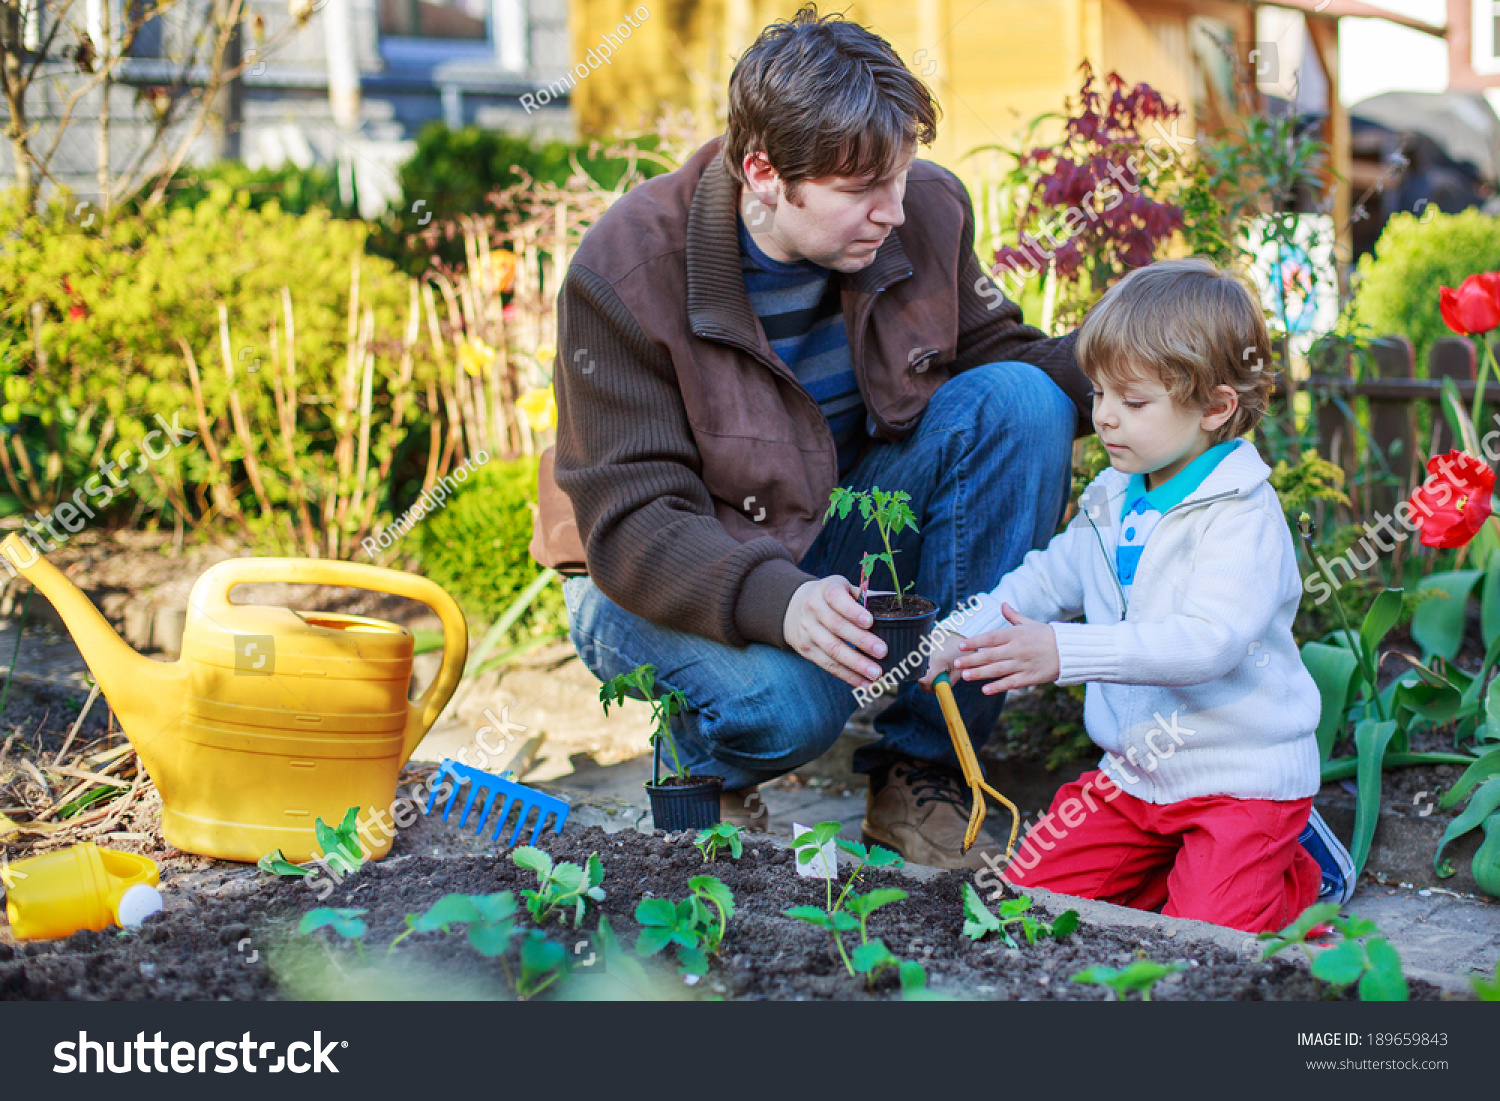 Young father and his little adorable son planting seeds and seedlings in vegetable garden, outdoors #189659843